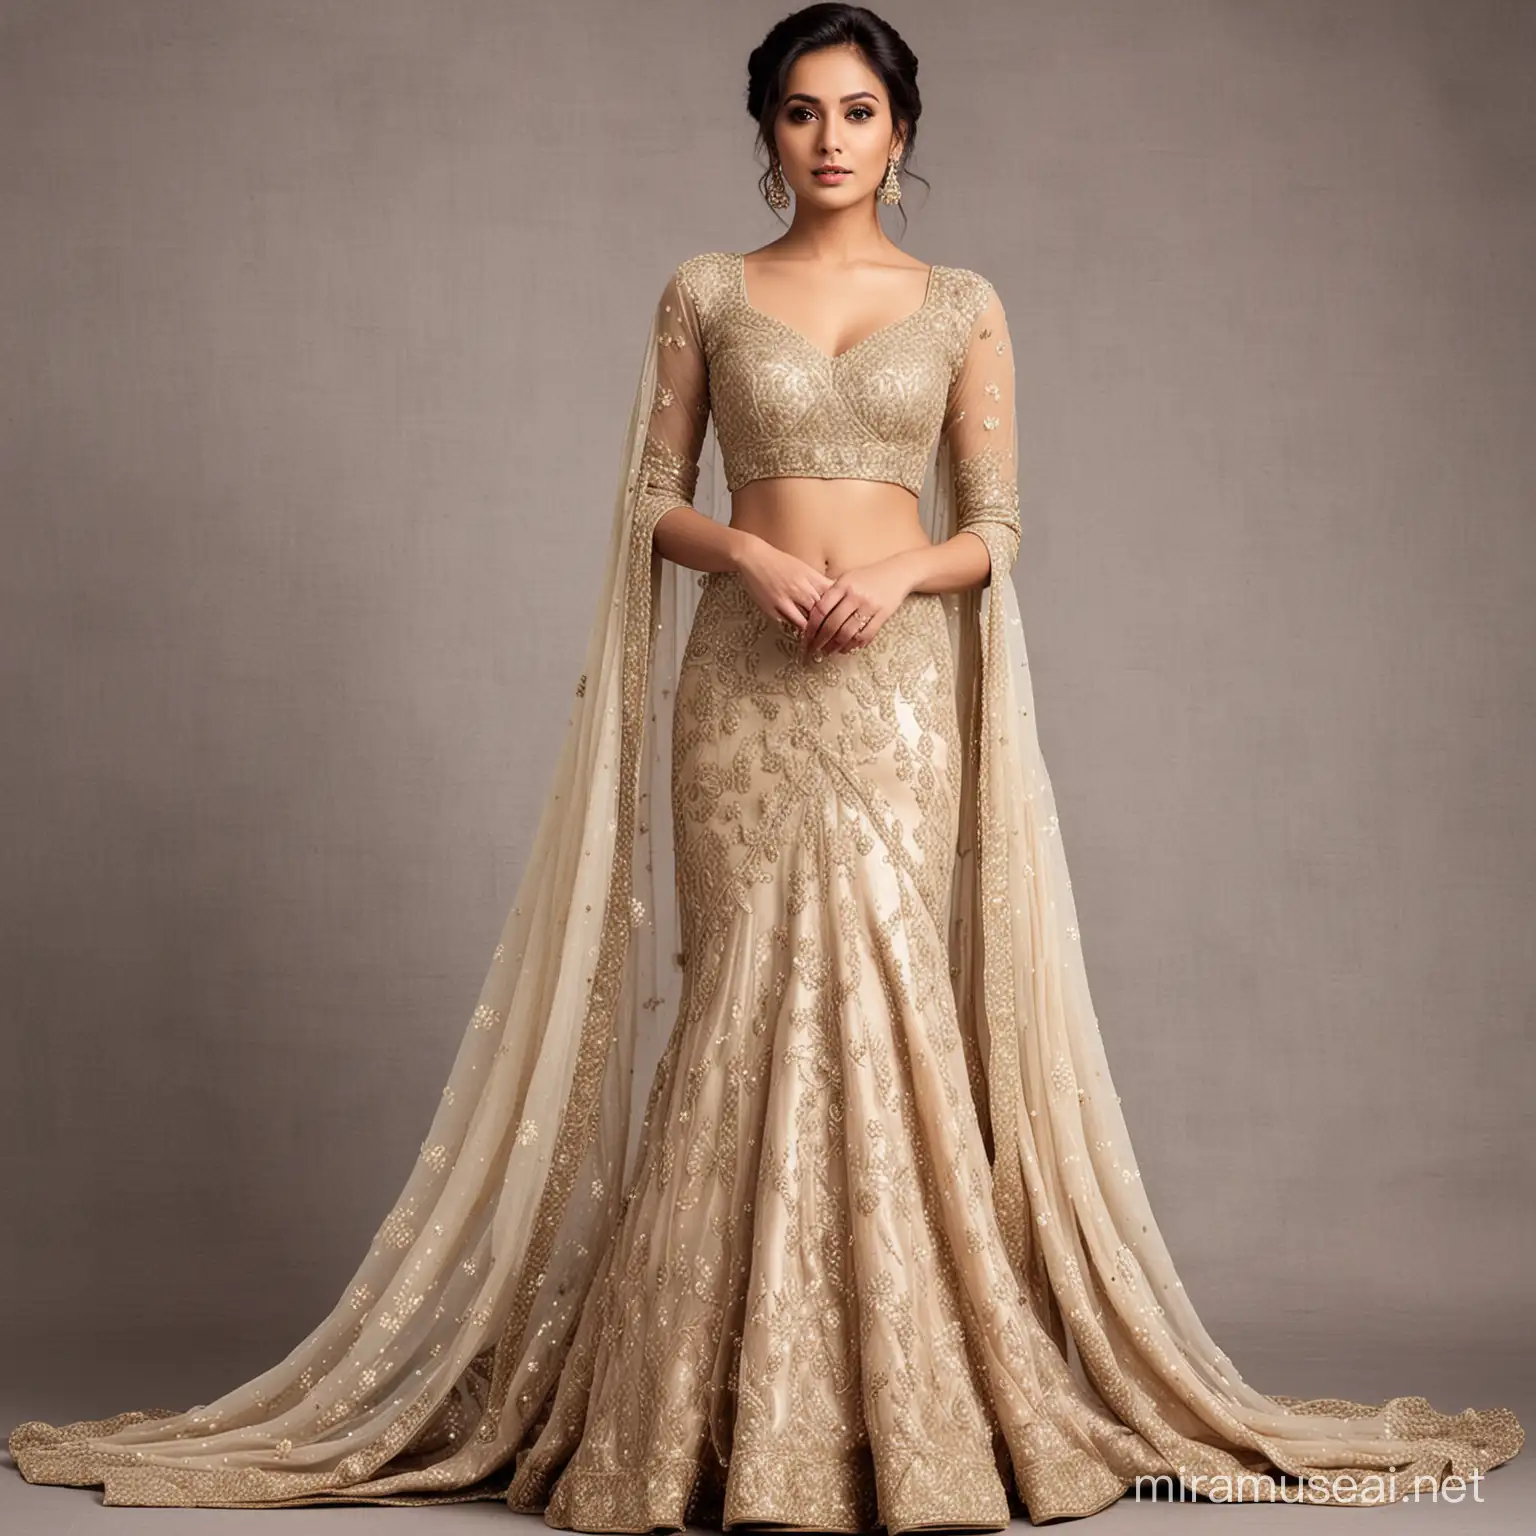 Bridal SareeInspired Gown Exquisite Fusion of Traditional Elegance and Contemporary Glamour